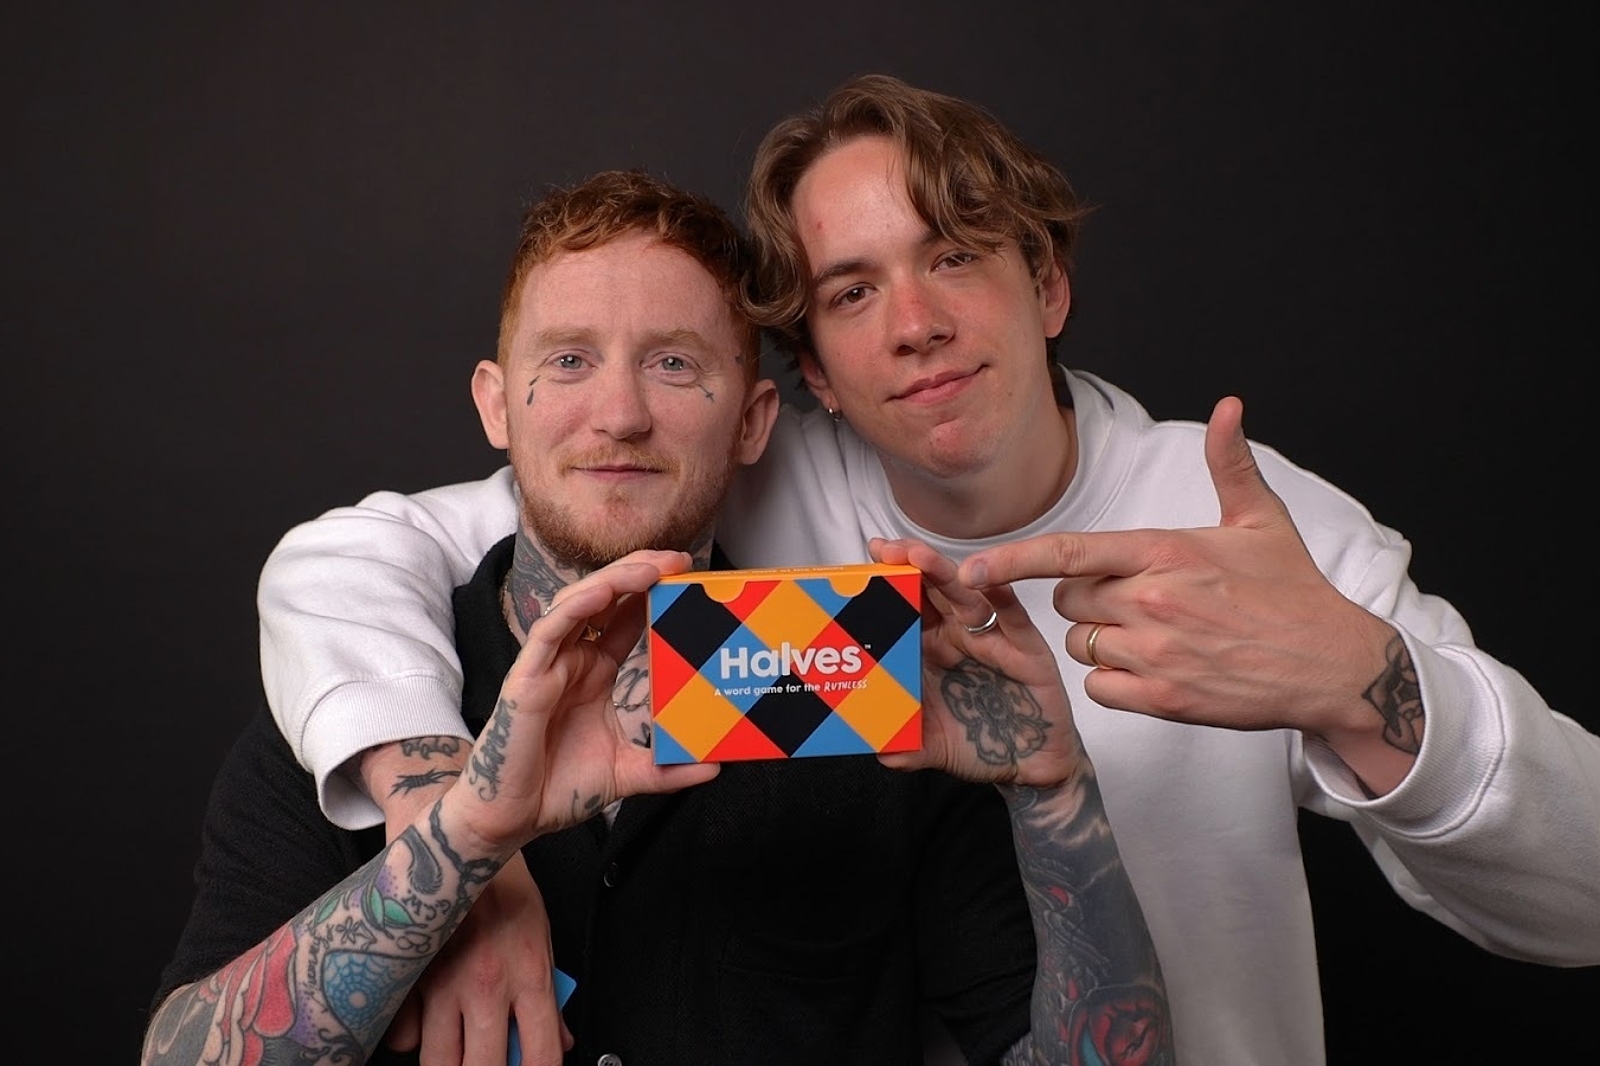 "It’s a party game" - Frank Carter talks new card game Halves